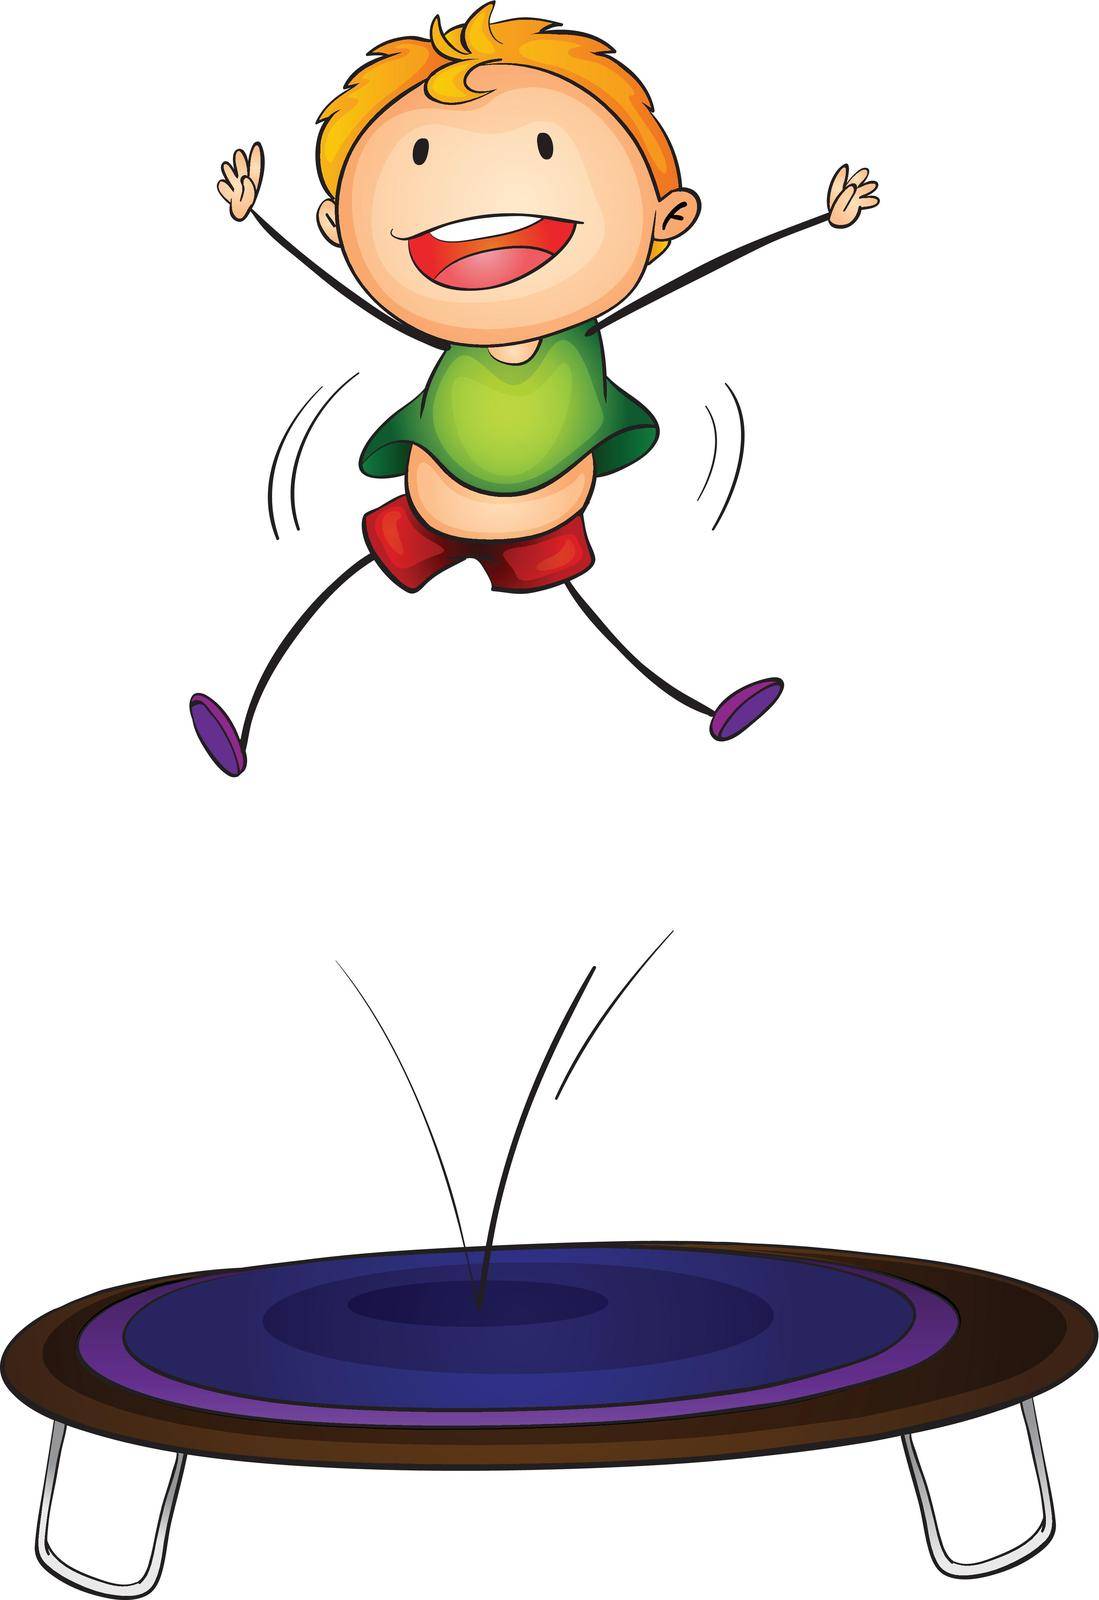 Illustration of a boy jumping on a trampoline